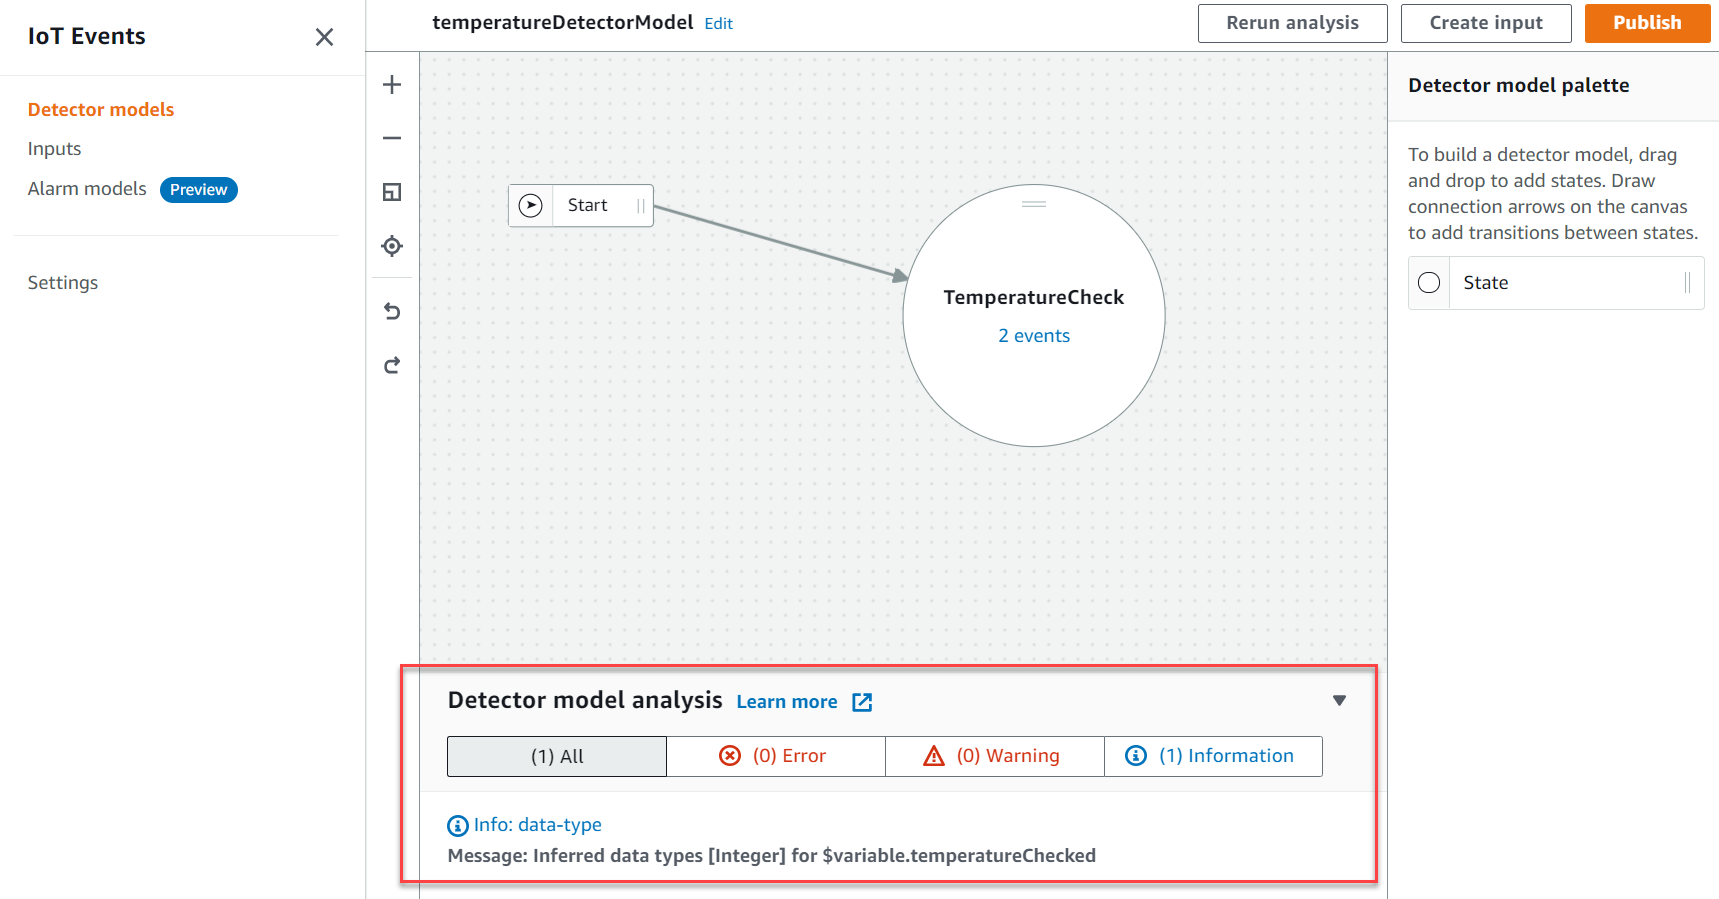 
                    Screenshot of how to analyze detector models in the Amazon IoT Events
                        console.
                